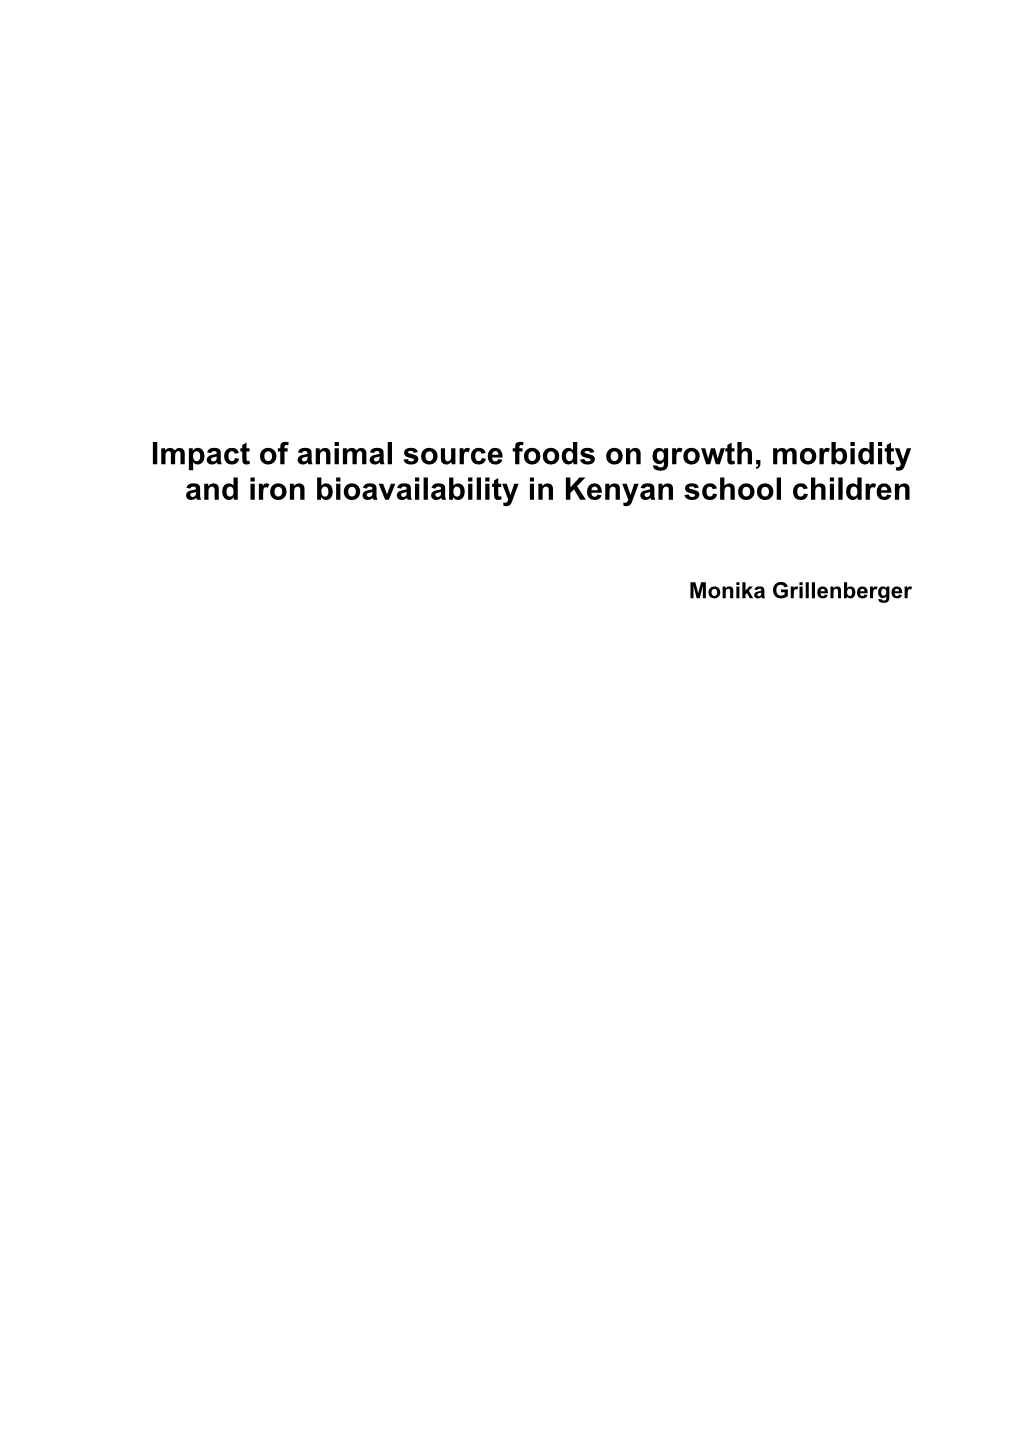 Impact of Animal Source Foods on Growth, Morbidity and Iron Bioavailability in Kenyan School Children